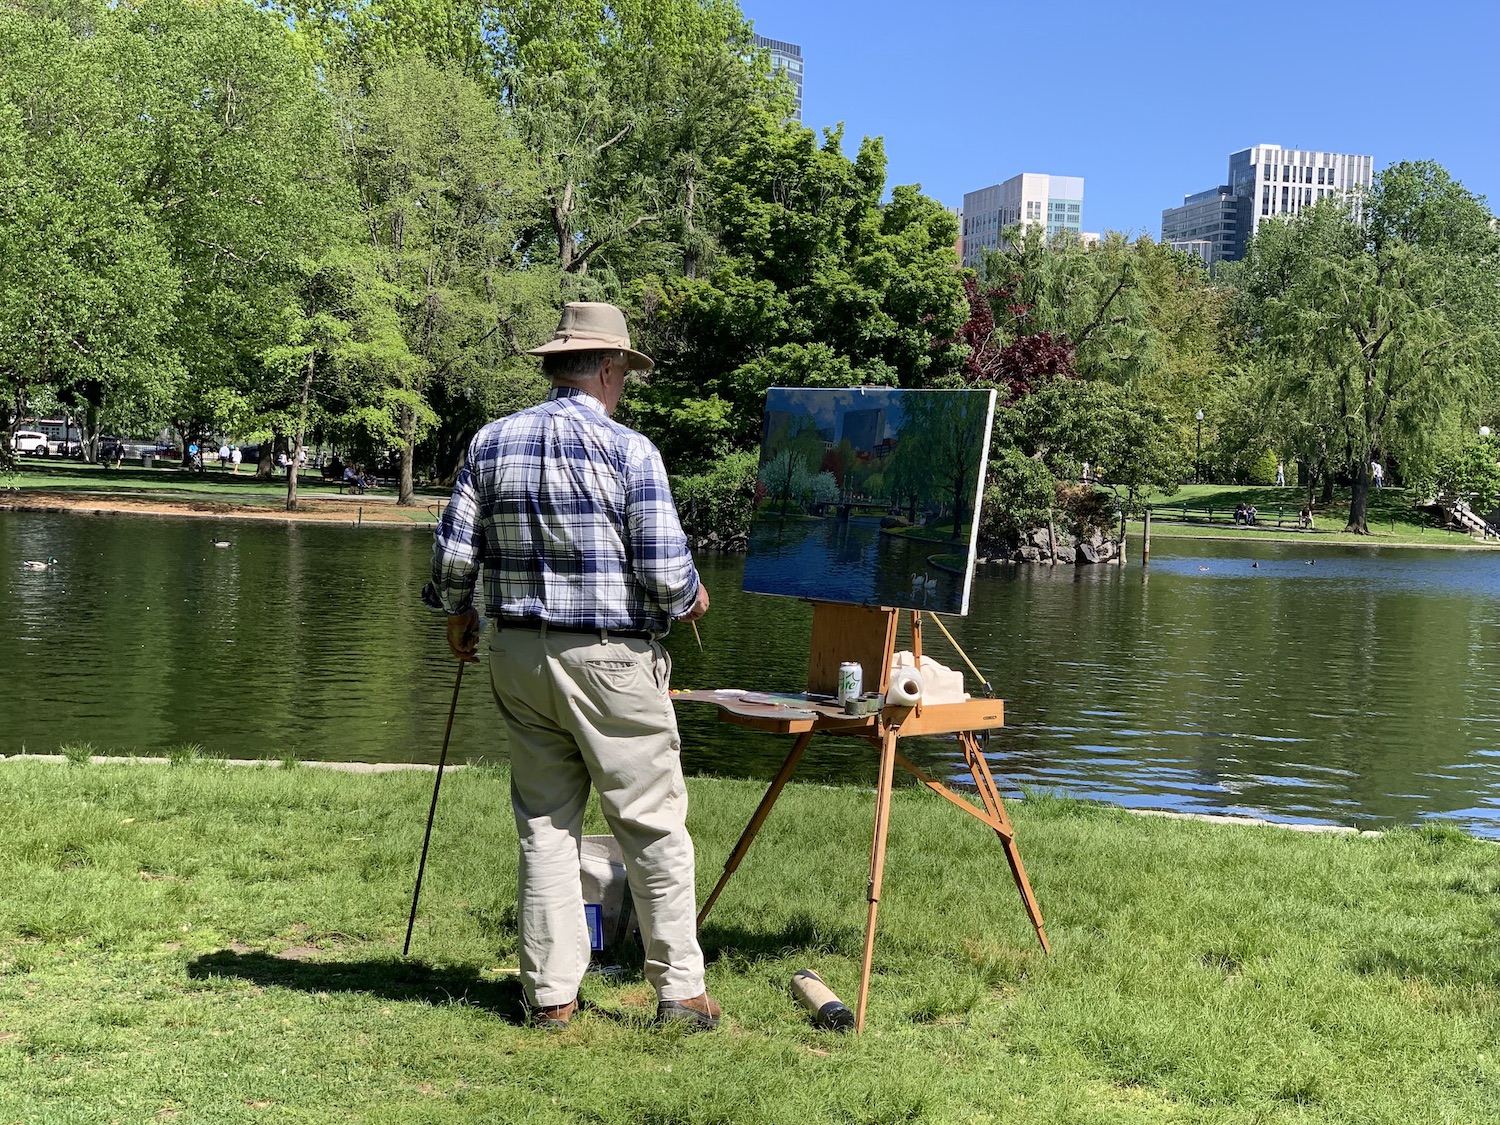 On the sunniest of days, one can find a dashing elderly man painting the scenery in the Boston Gardens.